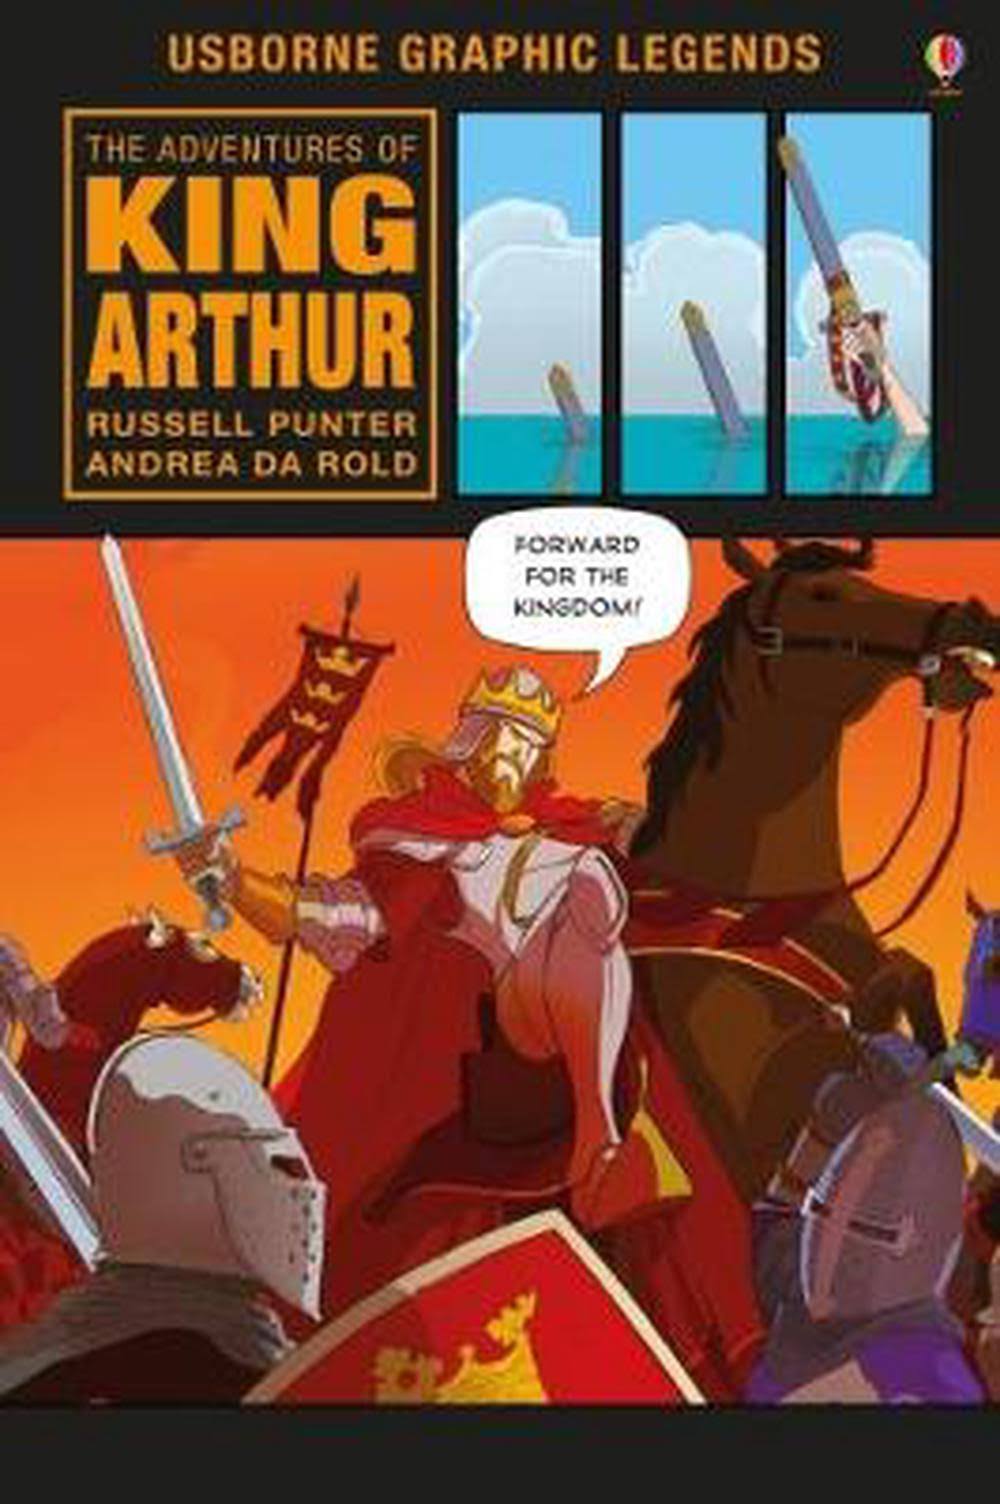 The Adventures of King Arthur by Russell Punter